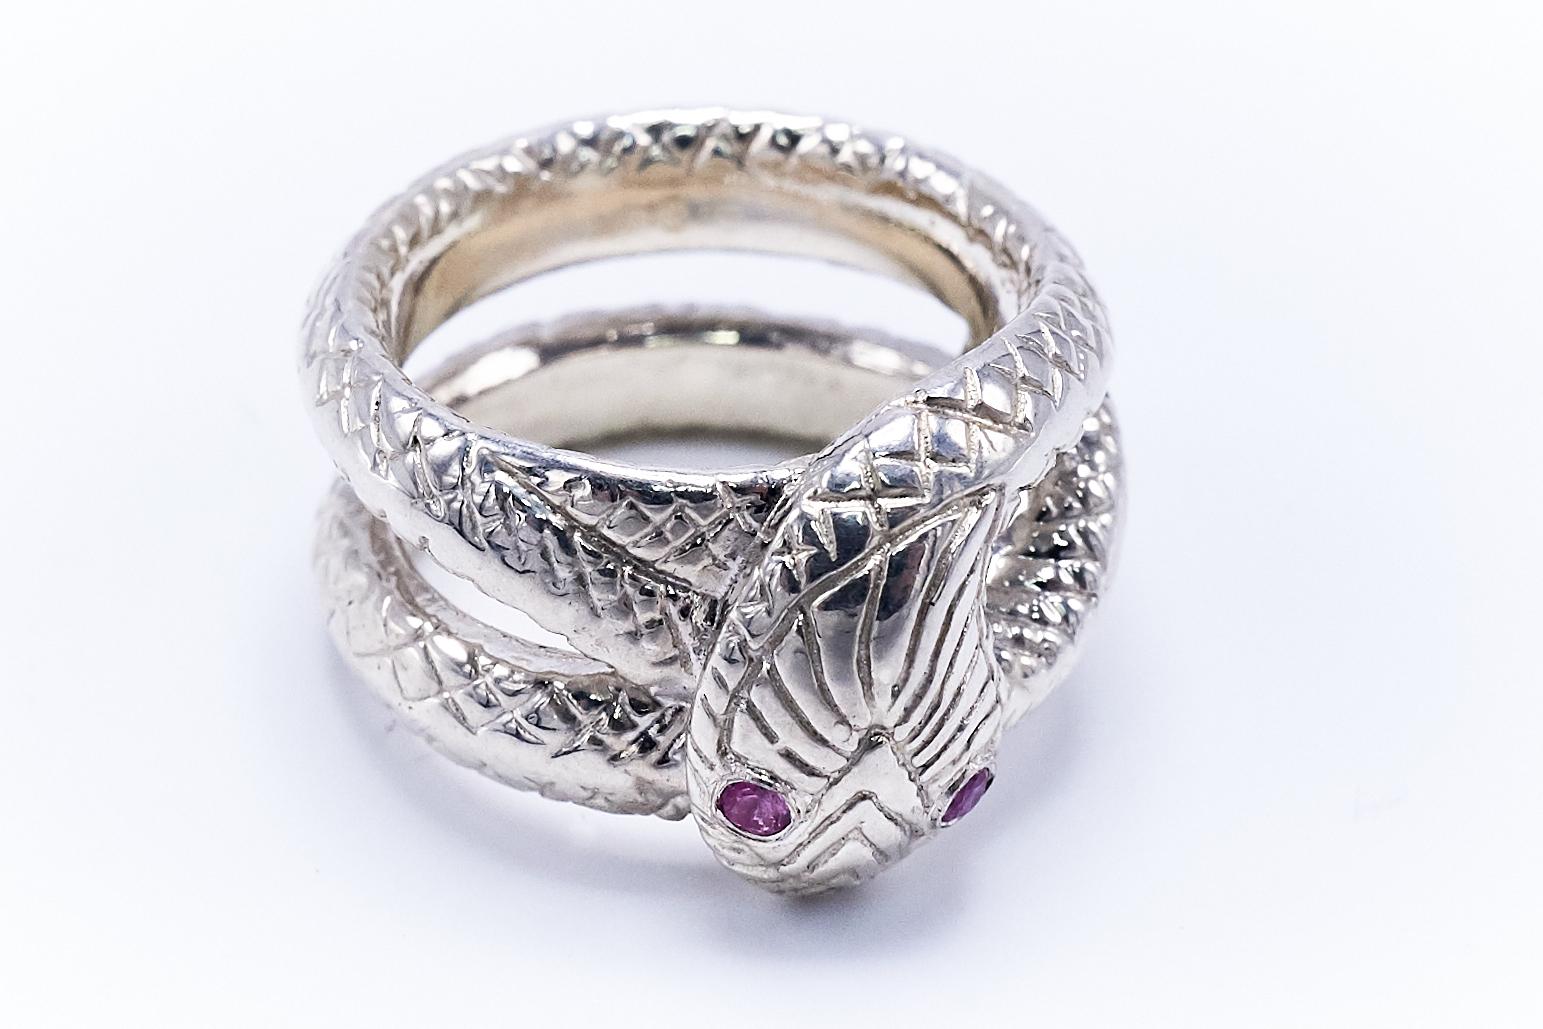 Pink Sapphire Snake Ring Sterling Silver Cocktail Ring Victorian Style Animal Jewelry J Dauphin

J DAUPHIN 